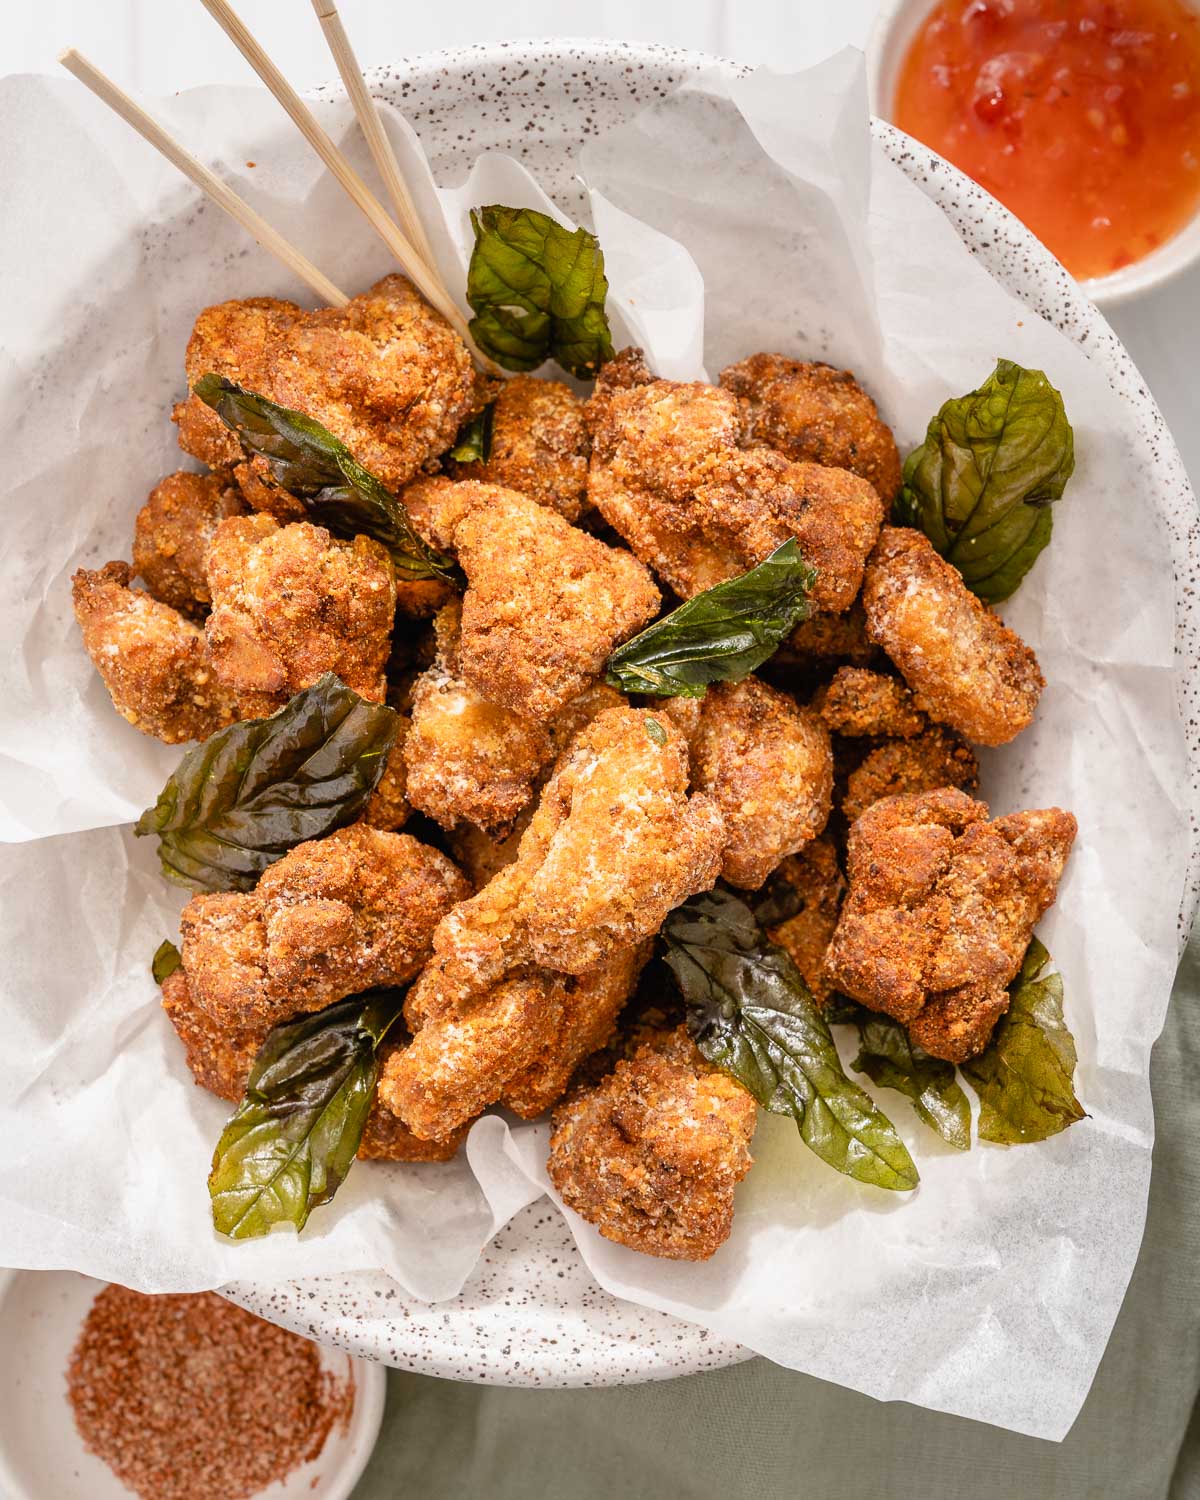 https://takestwoeggs.com/wp-content/uploads/2022/03/Taiwanese-Fried-Chicken-Takestwoeggs-Final-Photography-2.jpg